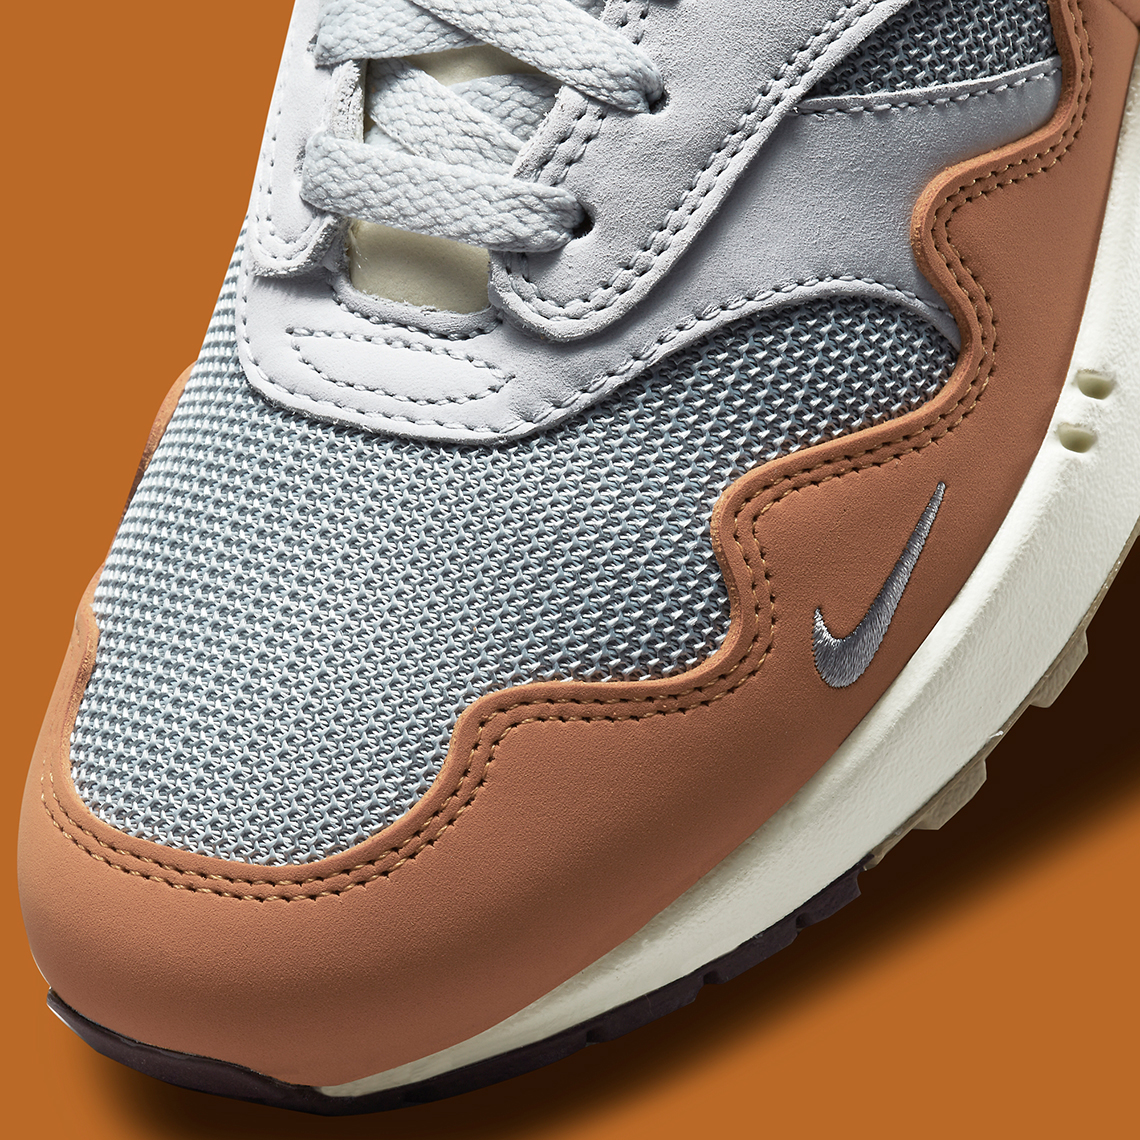 Rumored Patta x Nike Air Max 1 “White / Grey” Colorway Friends & Family  Release